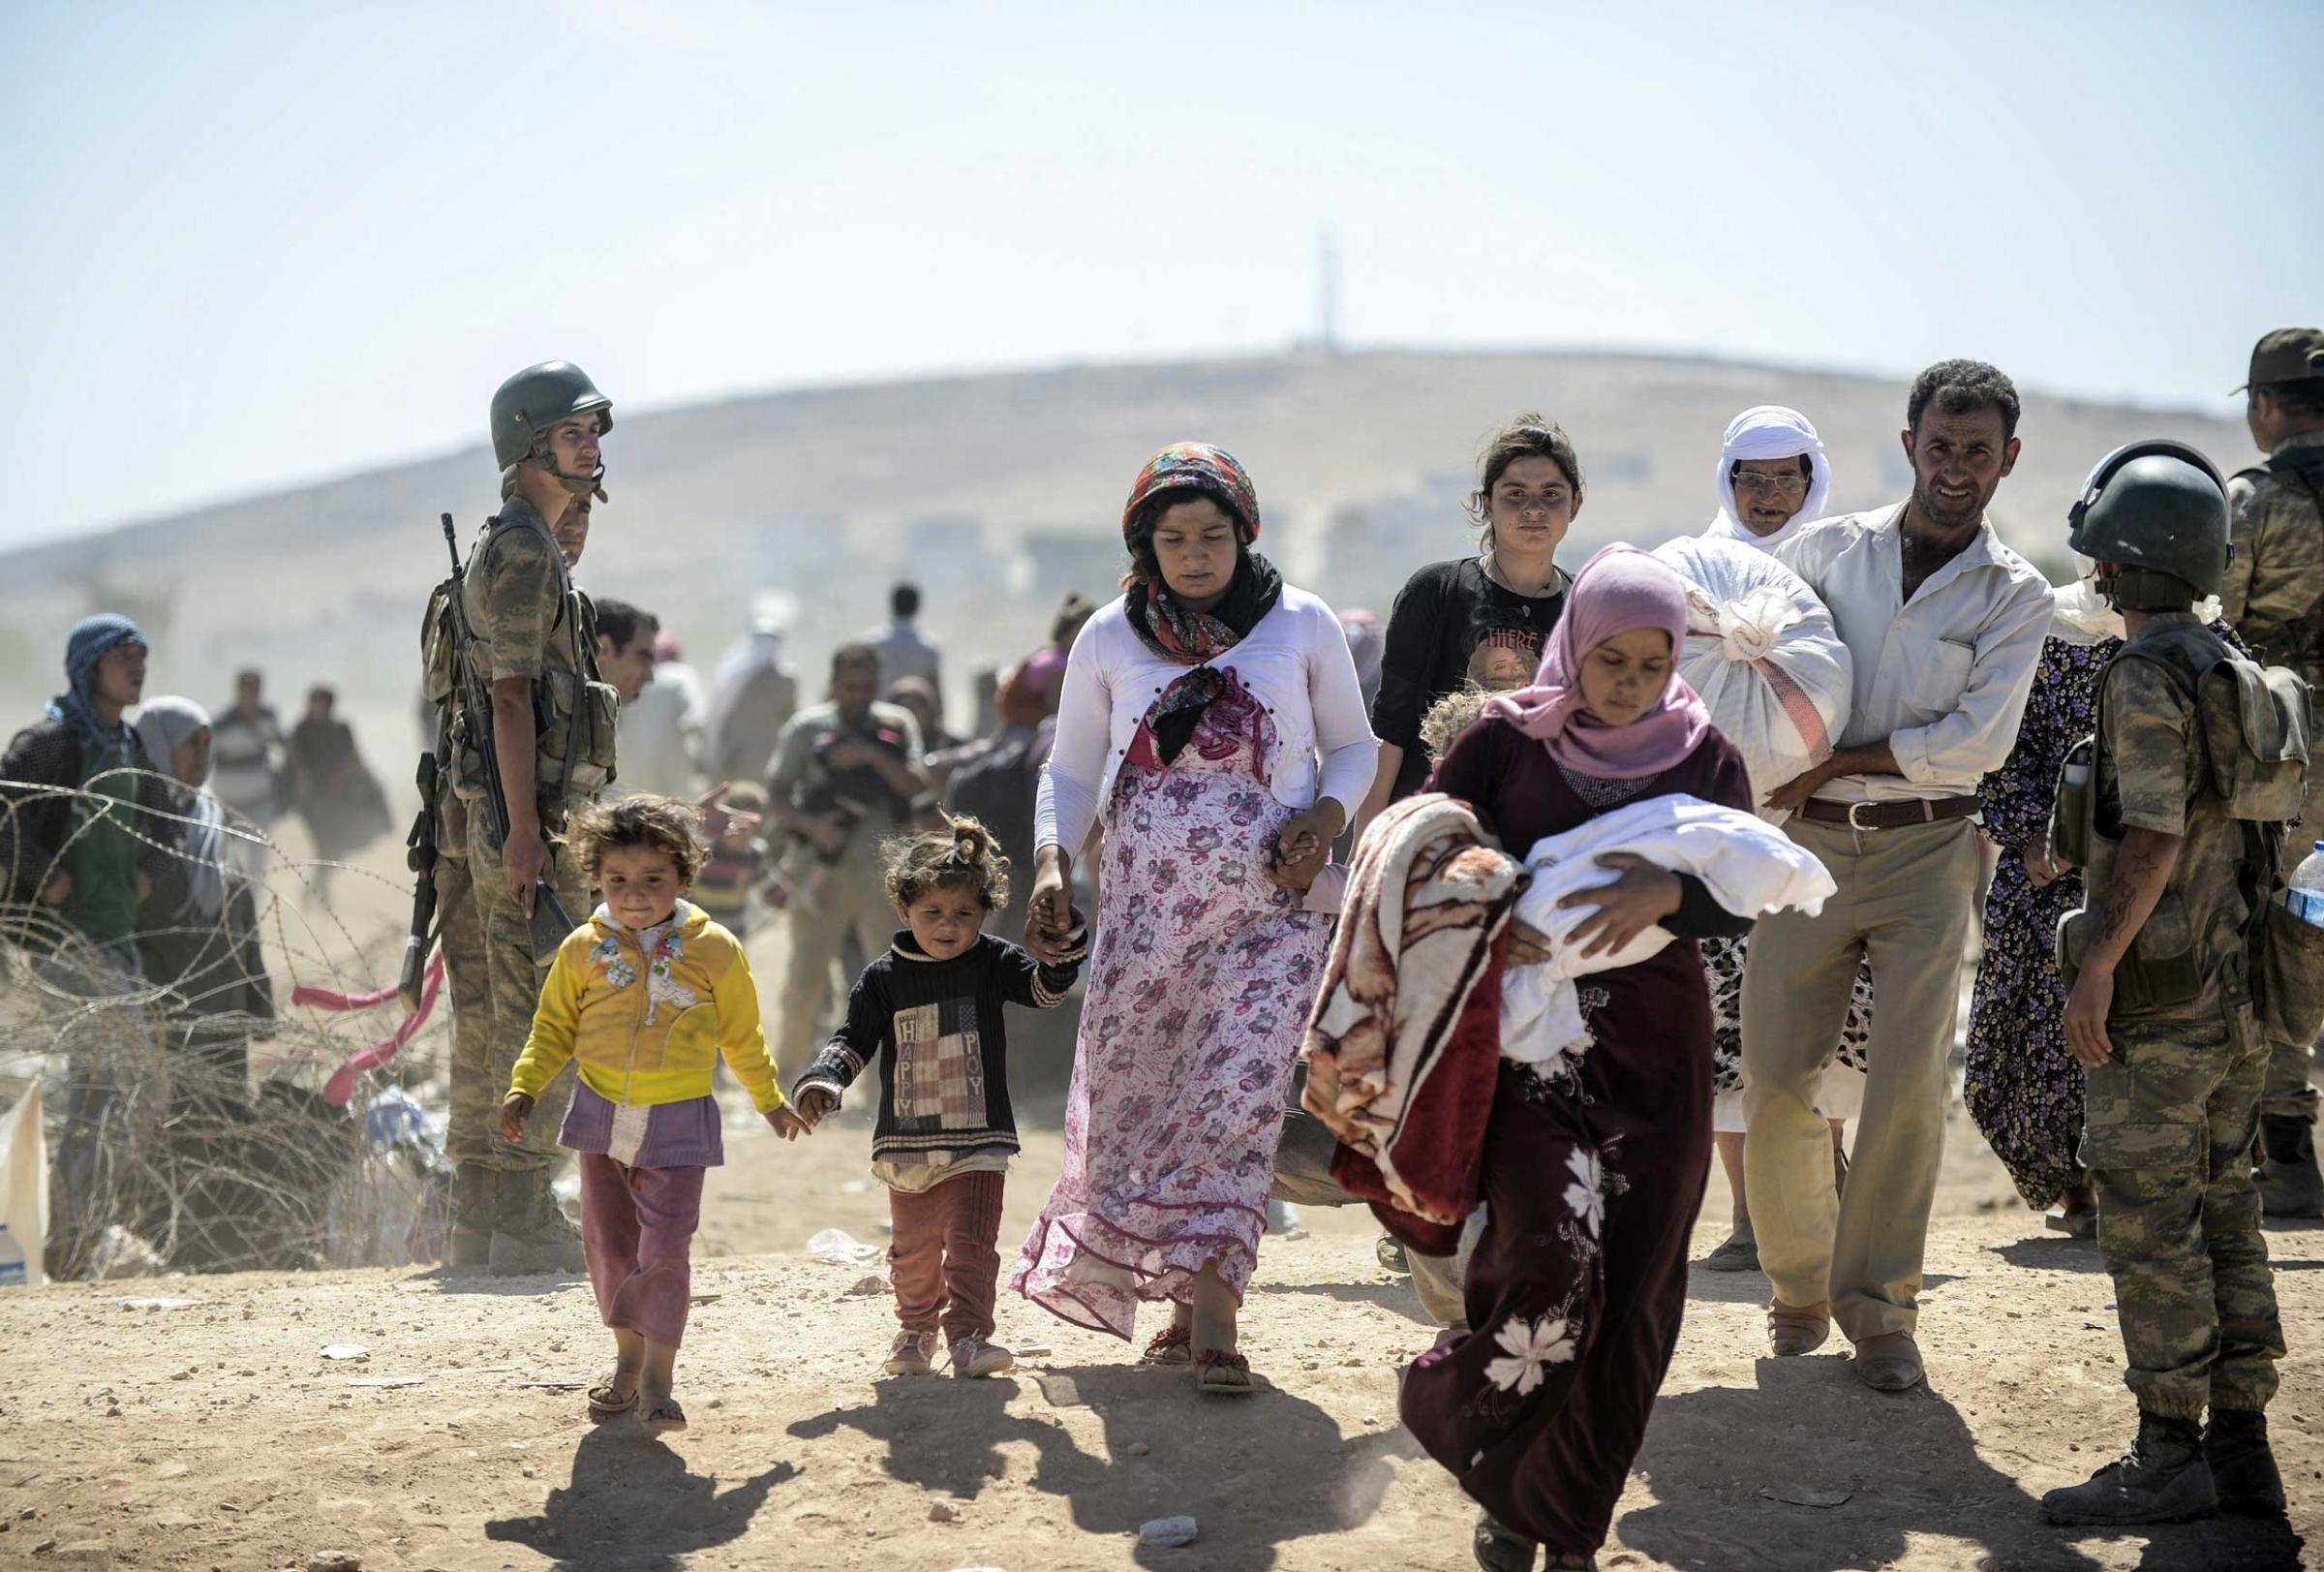 Syrian Kurds cross the border from Syria into Turkey near the southeastern town of Suruc in Sanliurfa province, on Sept. 20, 2014.